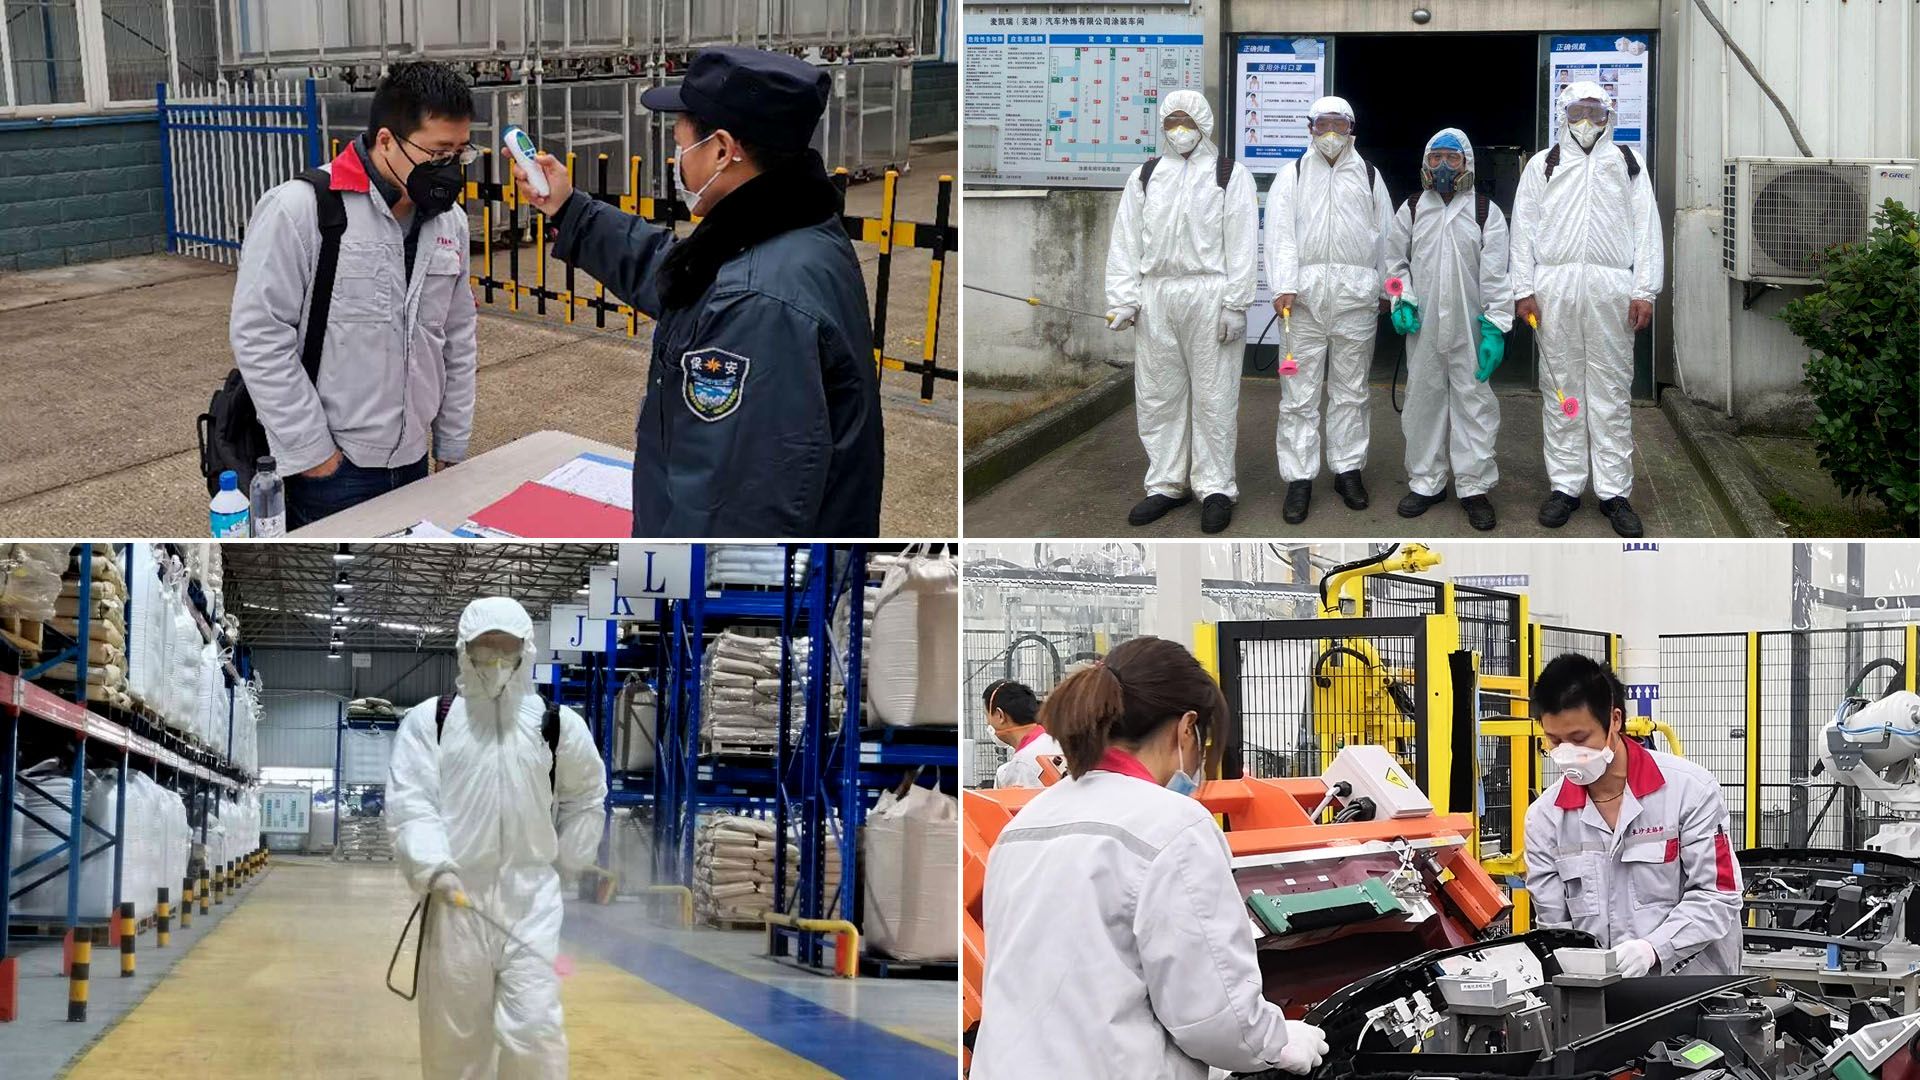 4 images of workers wearing protective gear and face masks at Magna factories in China. 